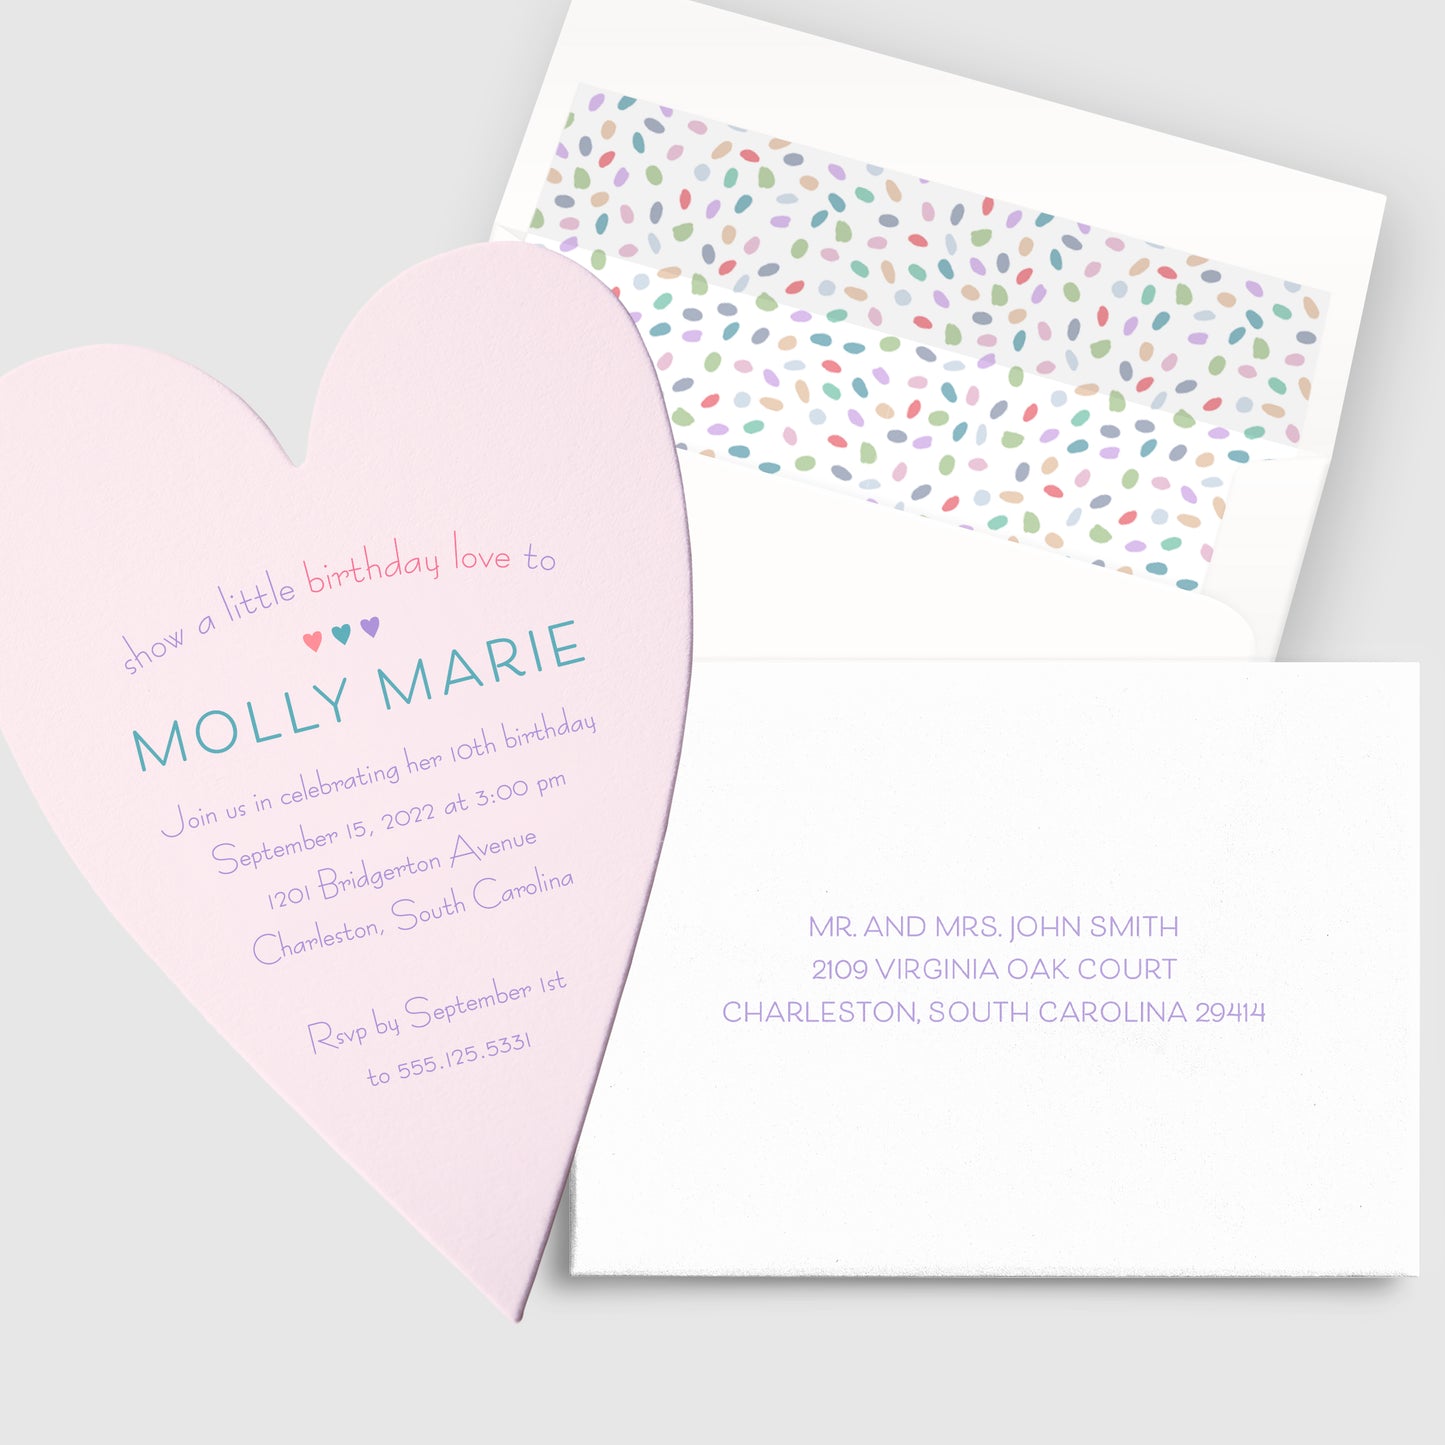 A Little Love Heart Shaped Birthday Party Invitation